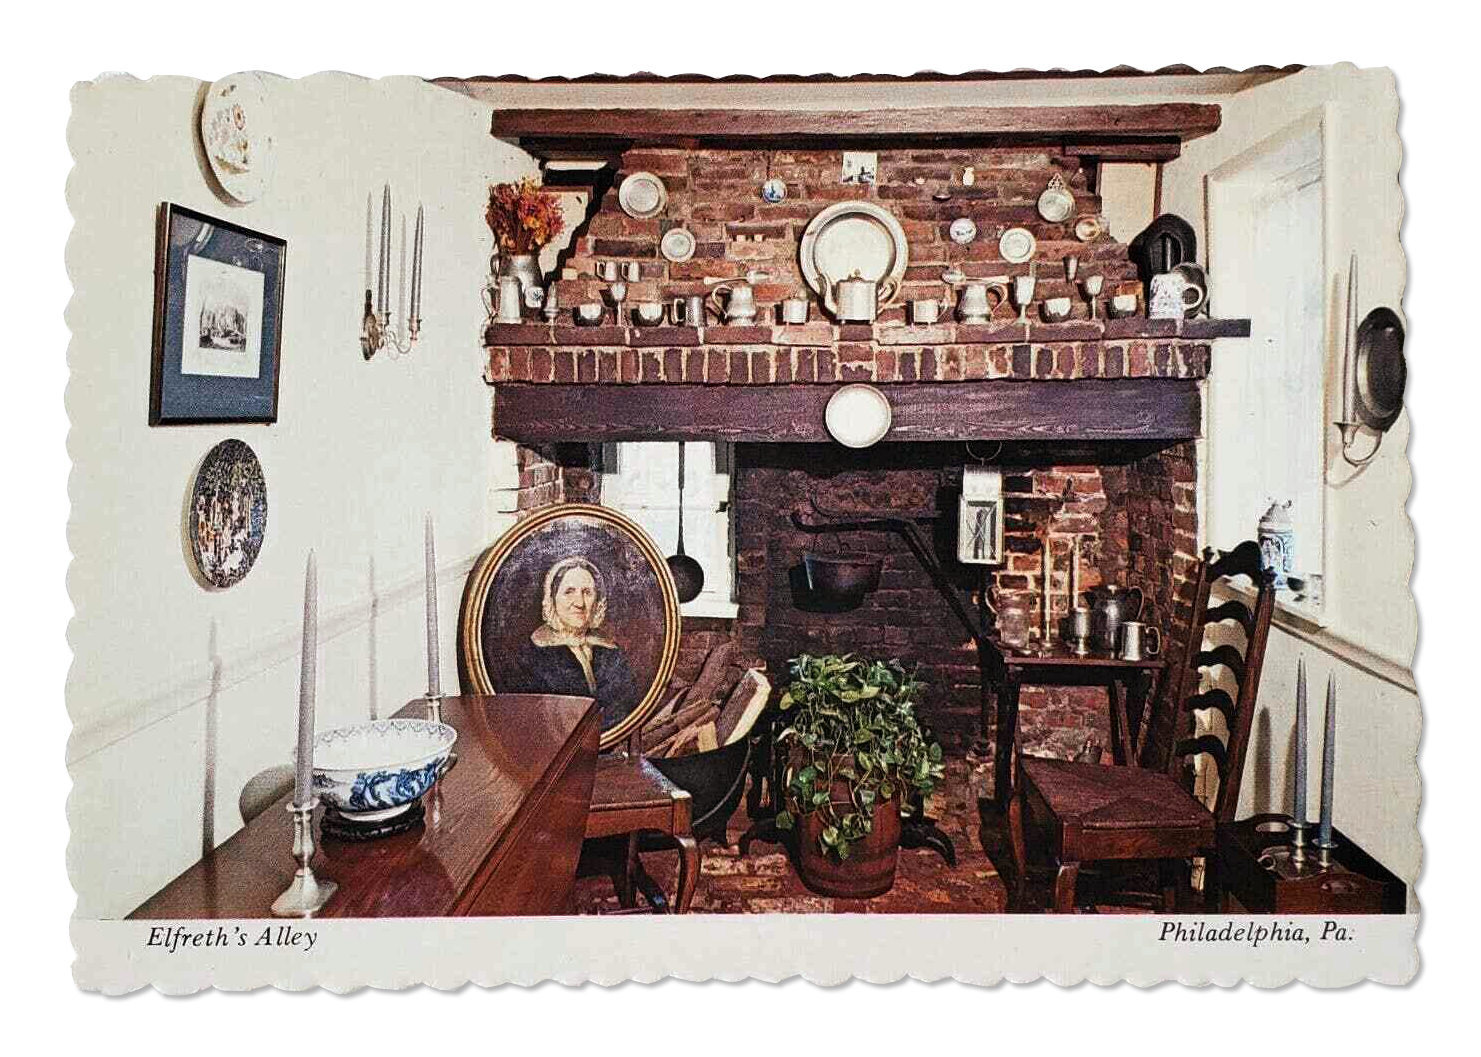 A Postcard of the Hearthroom at 122 Elfreth's Alley.
